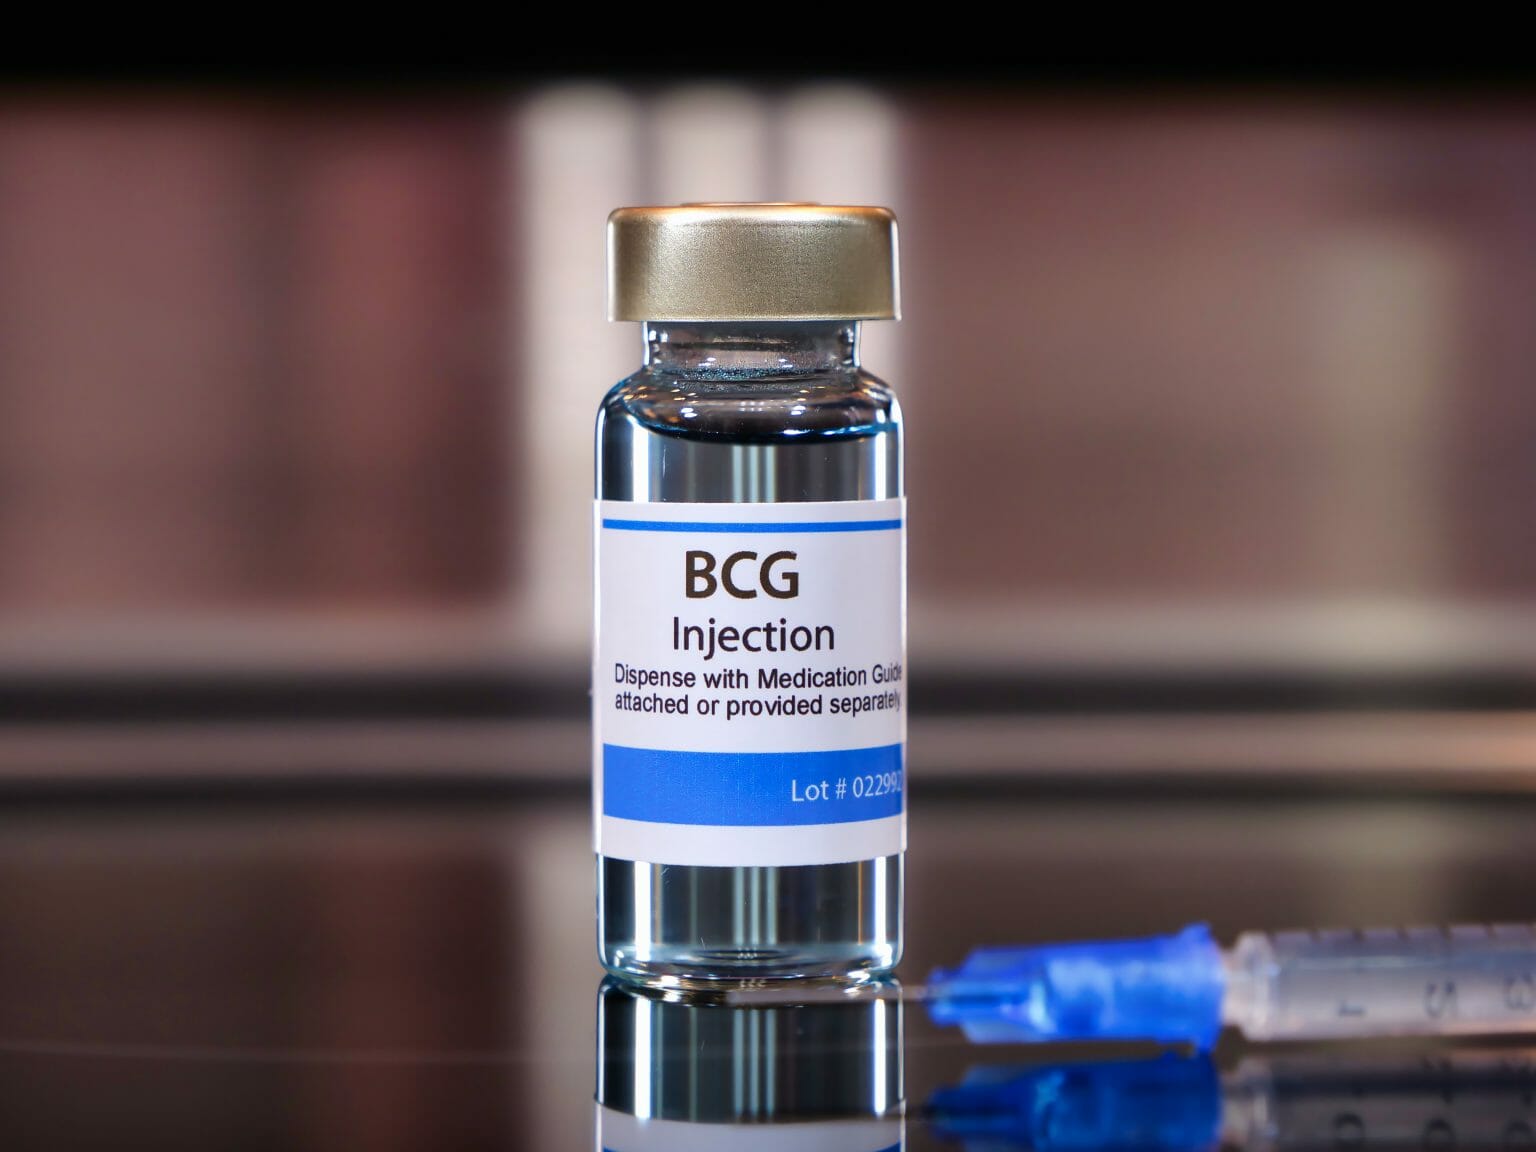 BCG injection vial